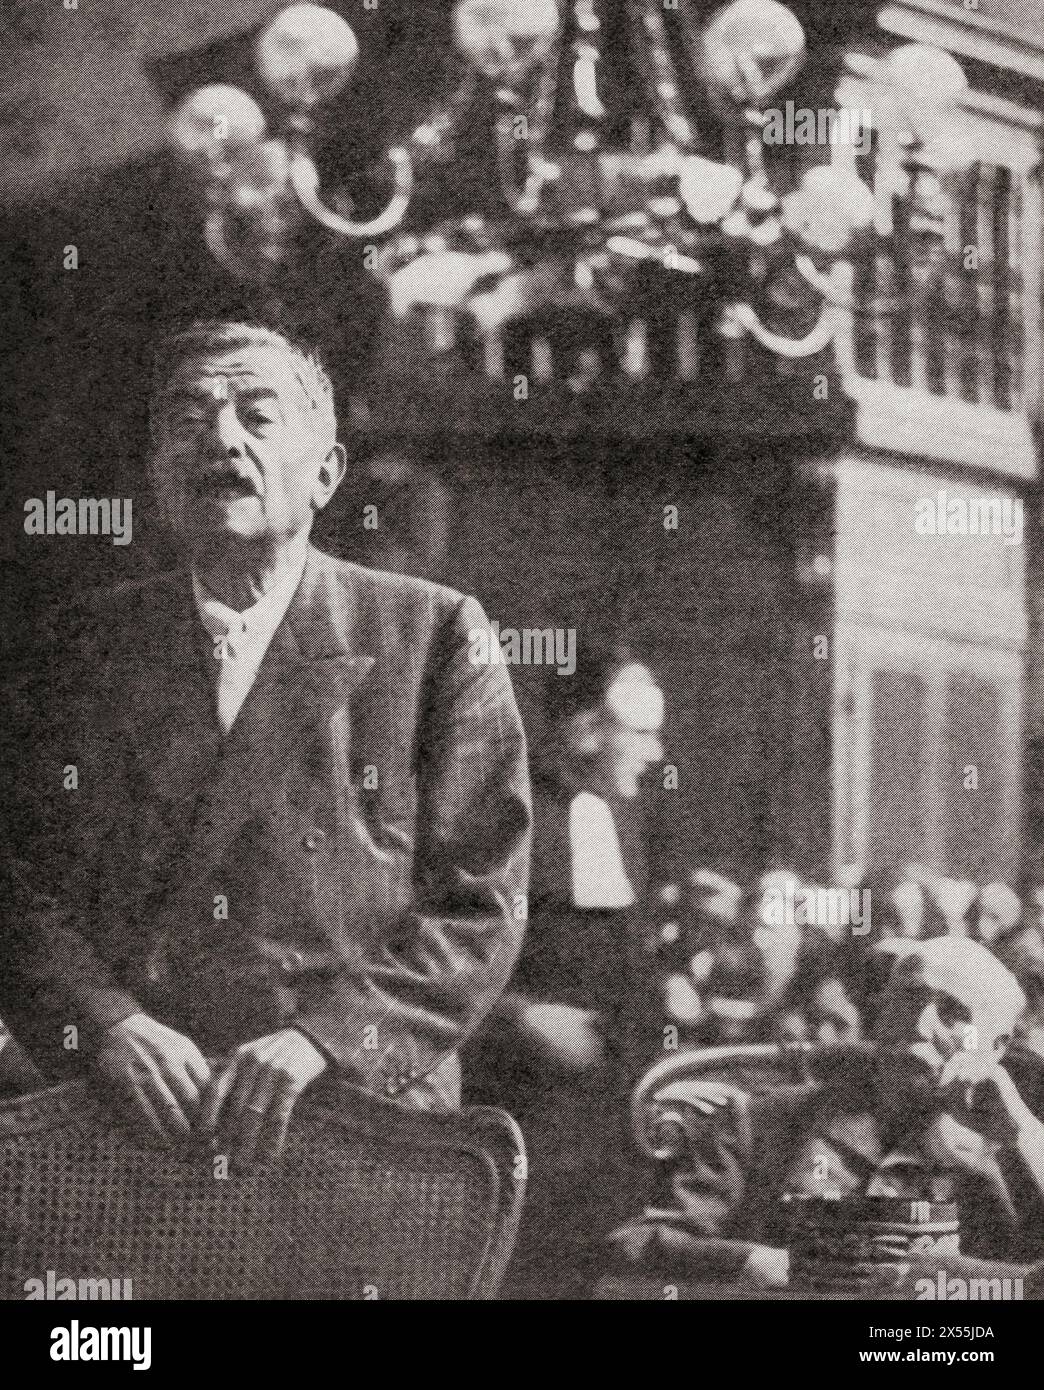 Pierre Laval seen here giving evidence at the trial of Philippe Petain, 23 July, 1945.  Pierre Jean Marie Laval, 1883 –1945. French politician and Prime Minister of France.  Henri Philippe Benoni Omer Pétain, 1856 – 1951, aka Philippe Pétain or Marshal Pétain. General commander of the French Army in World War I and head of the collaborationist regime of Vichy France, from 1940 to 1944.  The War in Pictures, Sixth Year. Stock Photo